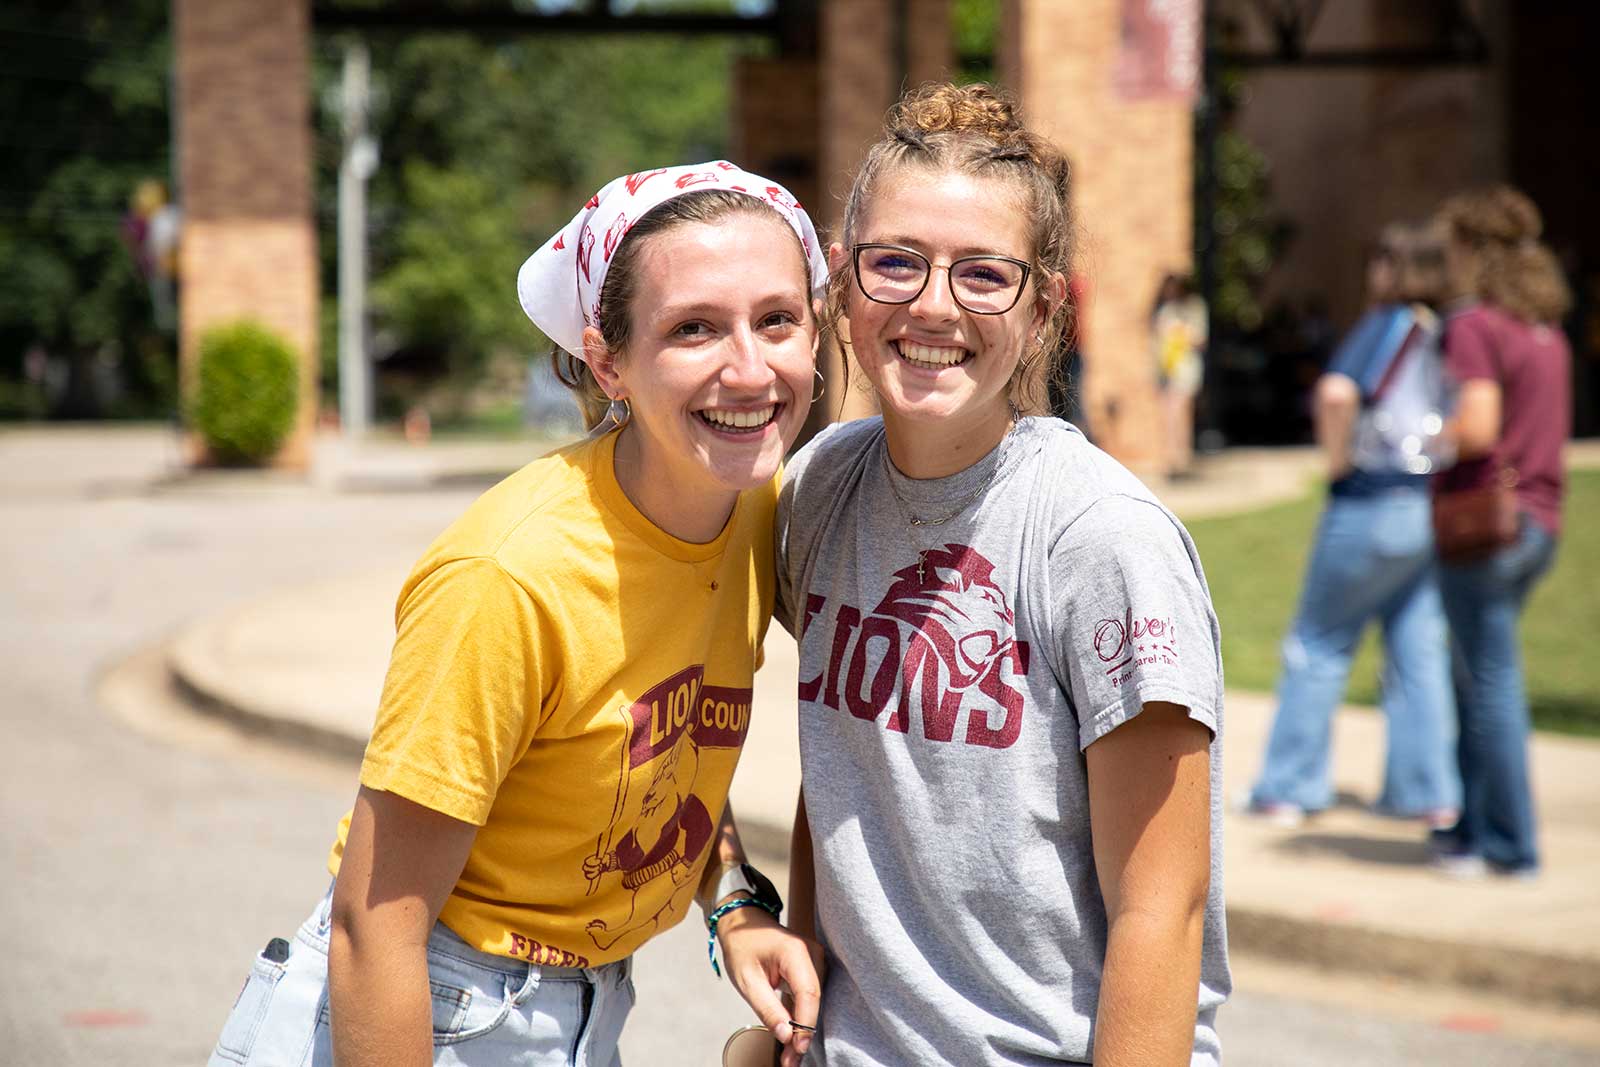 FHU's Family Sciences major: Focus on human behavior in family dynamics. Comprehensive program for early childhood education, family life education, and more. Prepare to impact families positively!